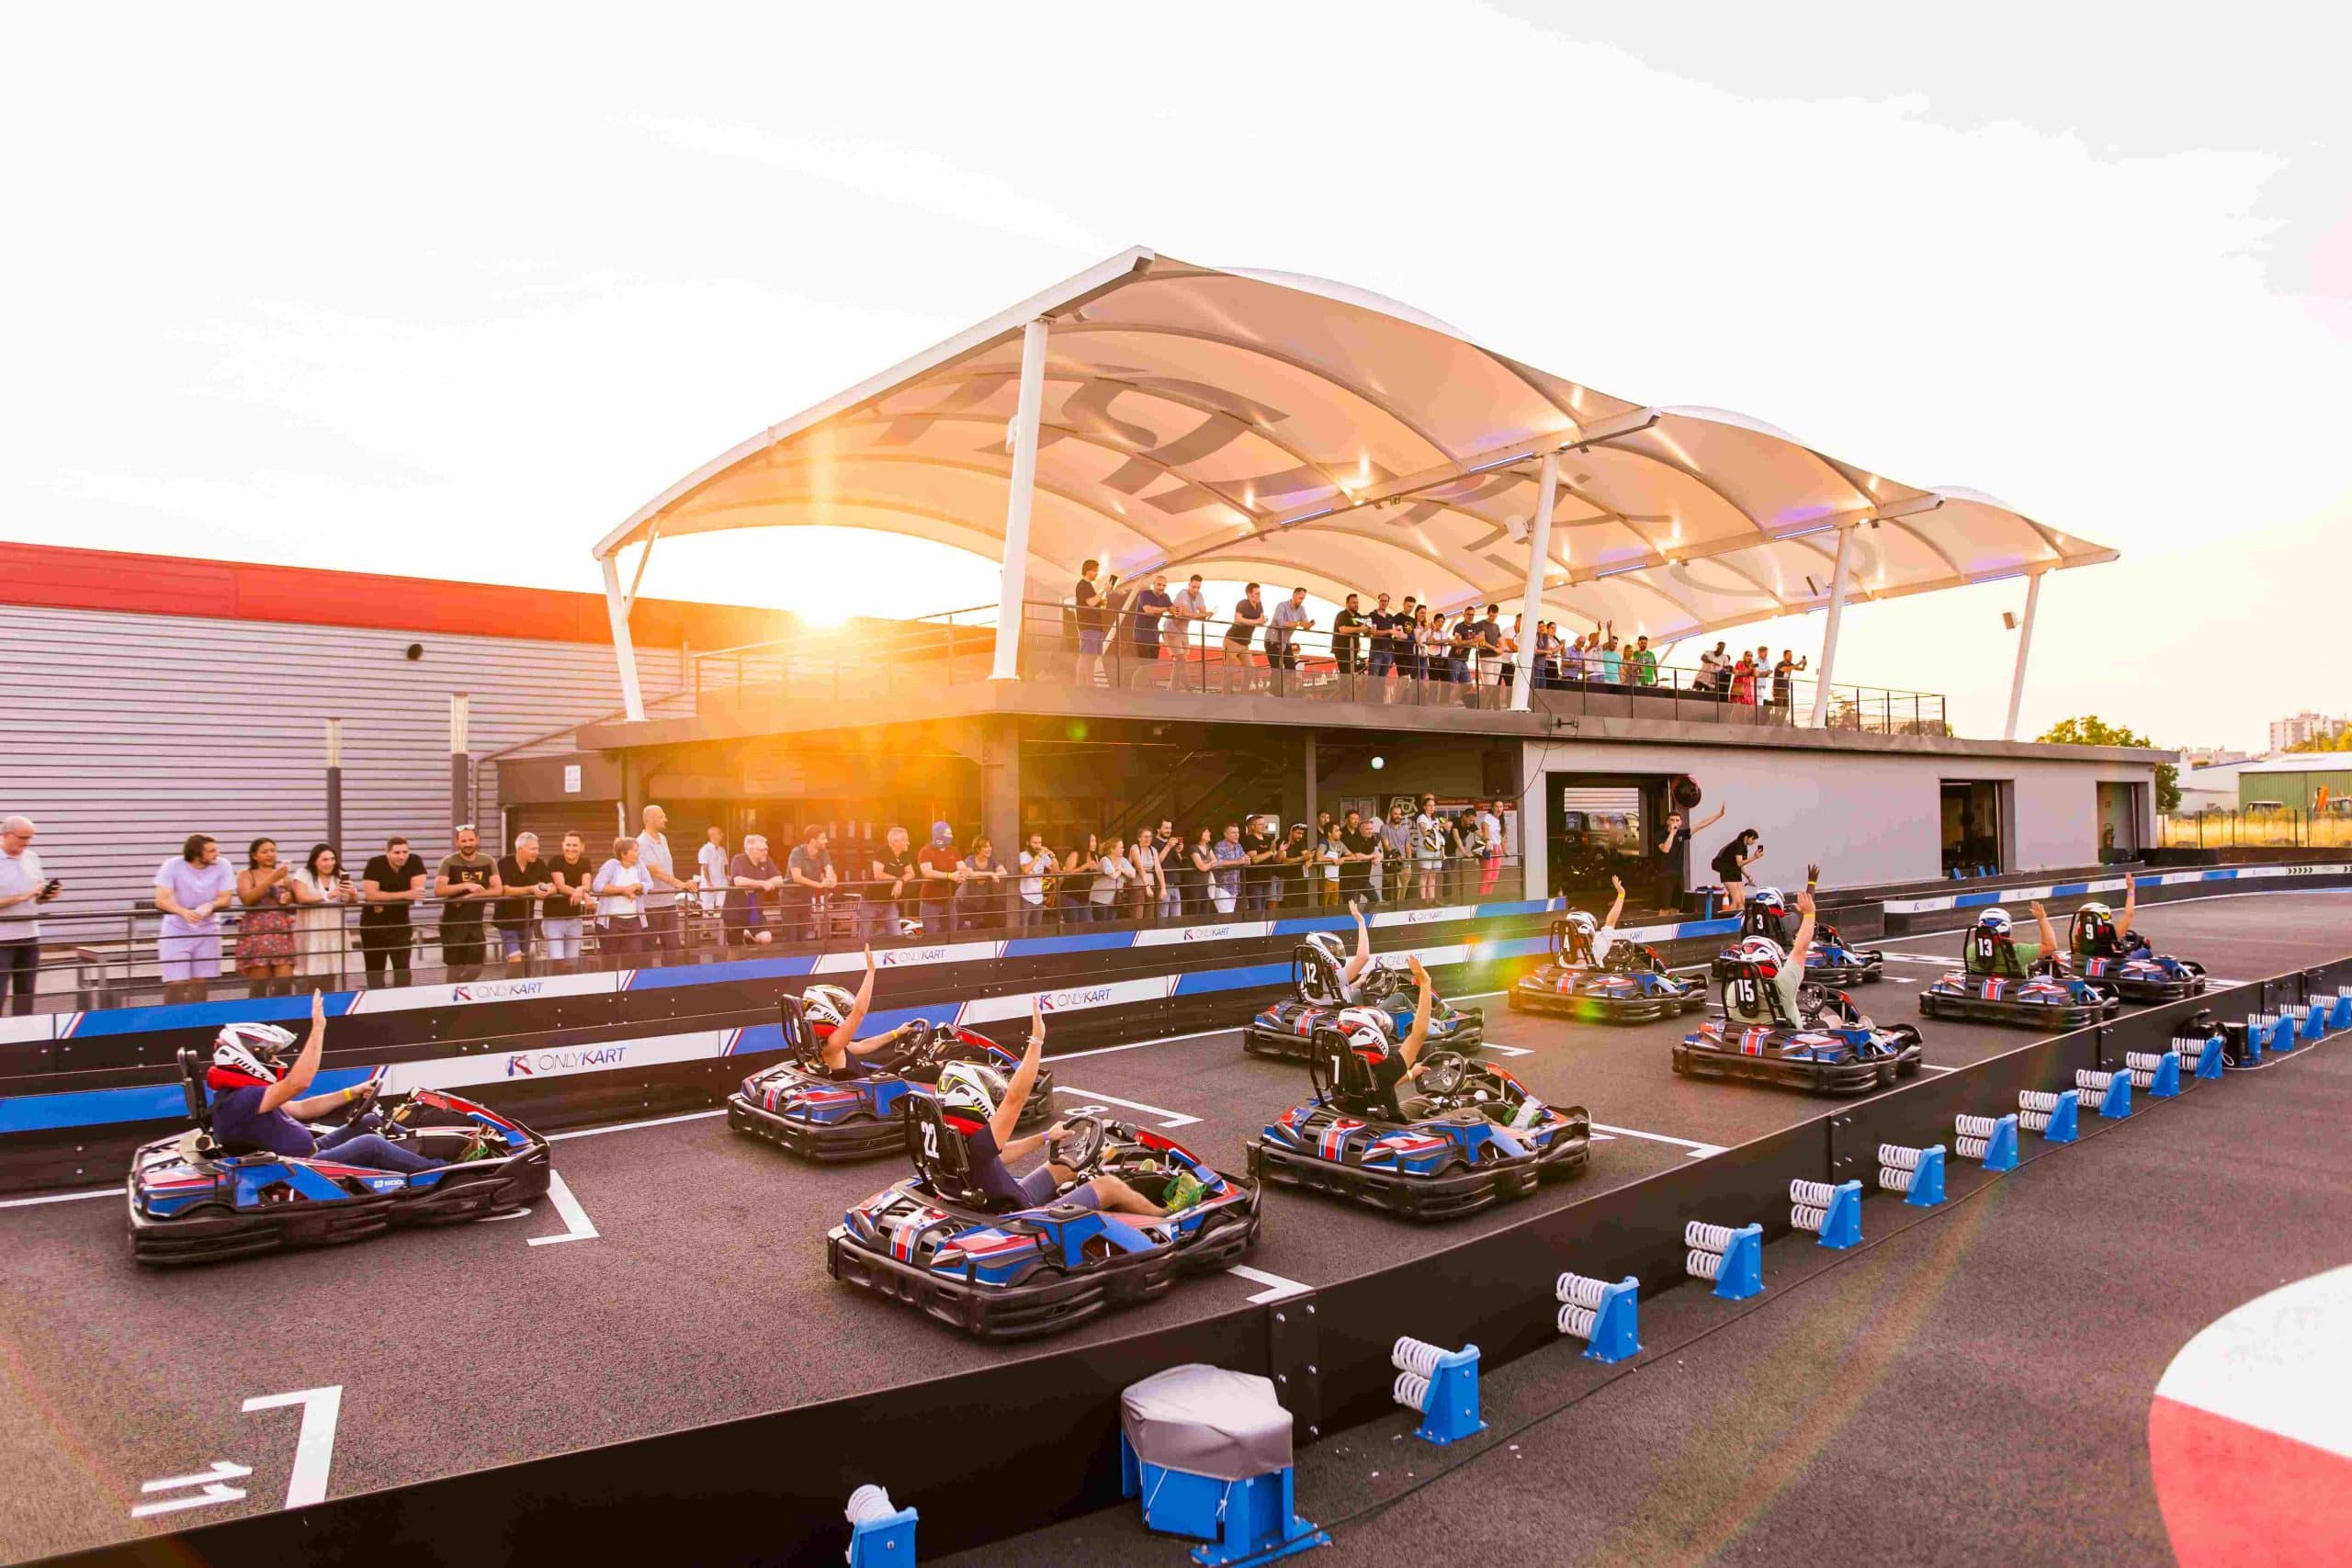 Complexe multi-loisirs Only Kart team building incentive Karting outdoor